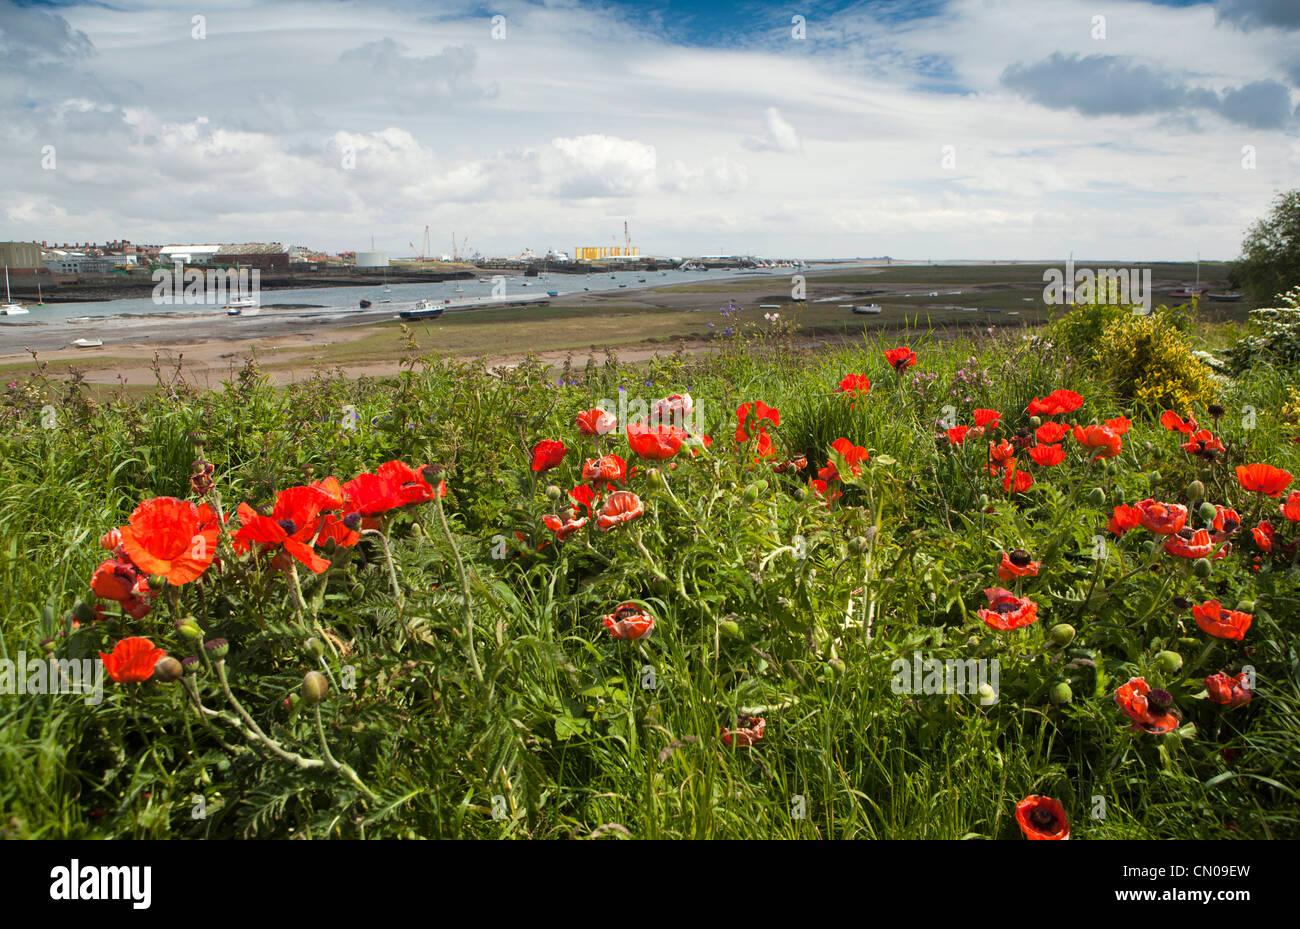 UK, Cumbria, Barrow in Furness, poppies growing on banks of Walney Channel Stock Photo